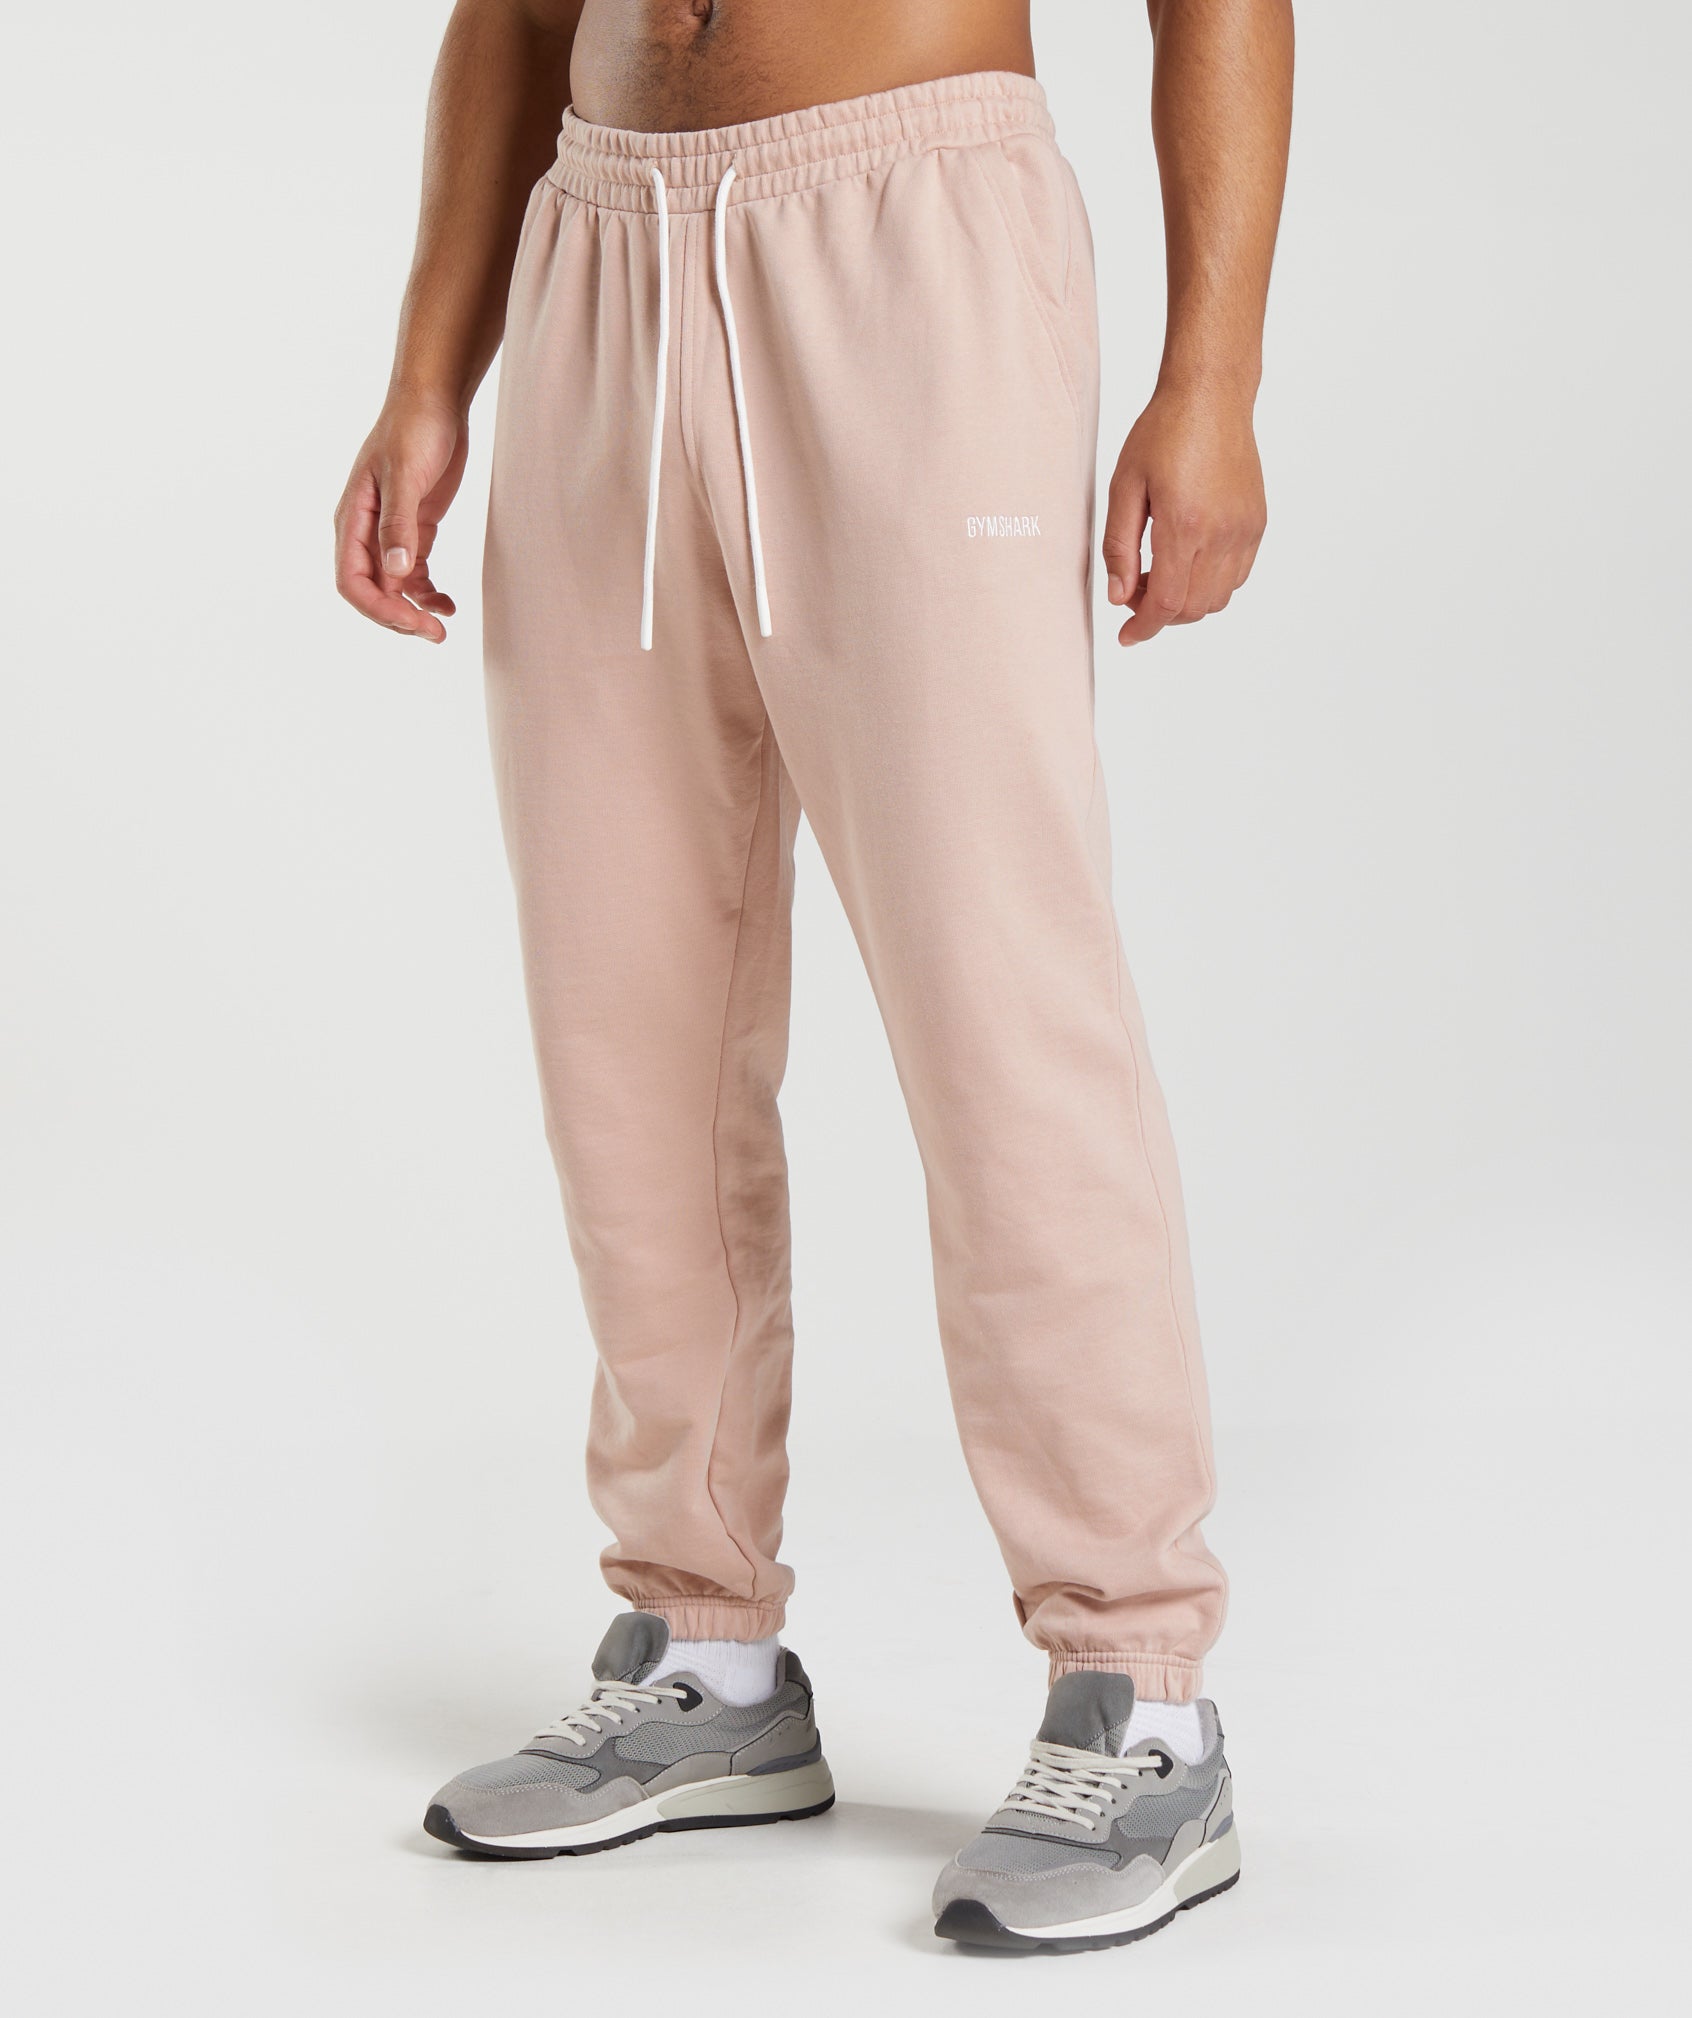 Gymshark Rest Day Sweats Joggers - Dusty Taupe